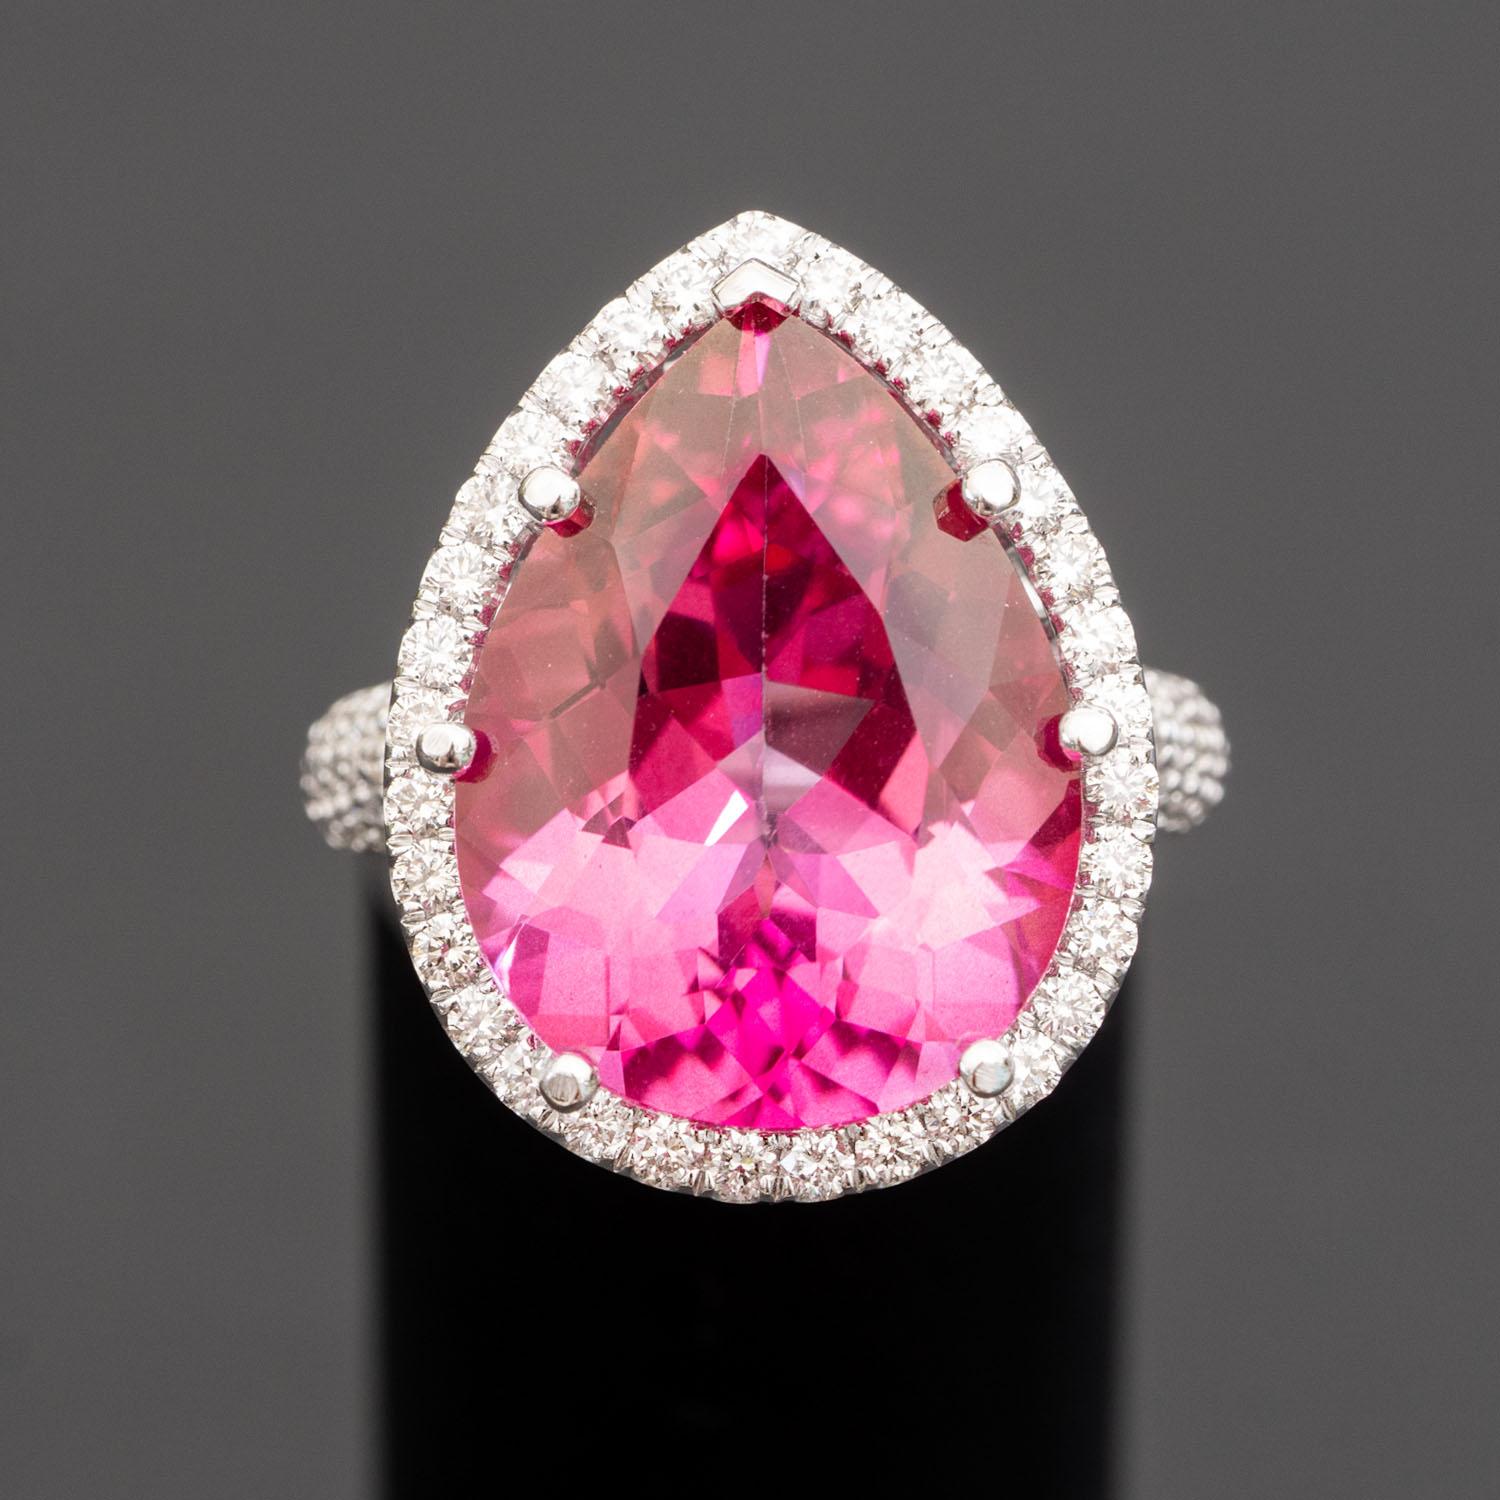 Capture the senses with color and dazzle them with brilliance - a full 18 carats’ worth. At the heart of this singular cocktail ring design, a pear-shaped heart of cerise natural topaz shines, ringed by brilliant-cut natural diamonds on the edges